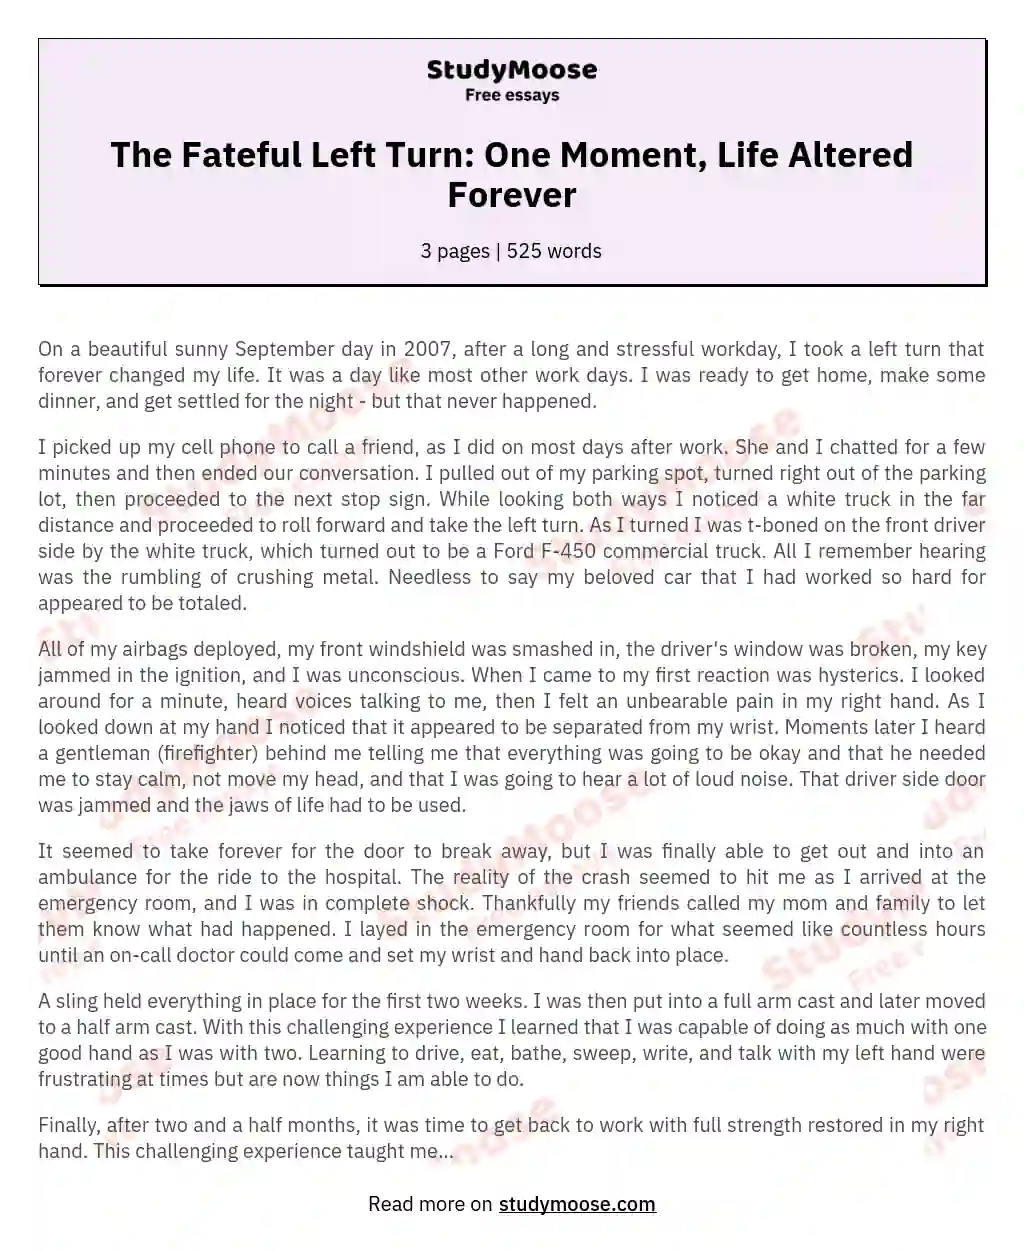 The Fateful Left Turn: One Moment, Life Altered Forever essay